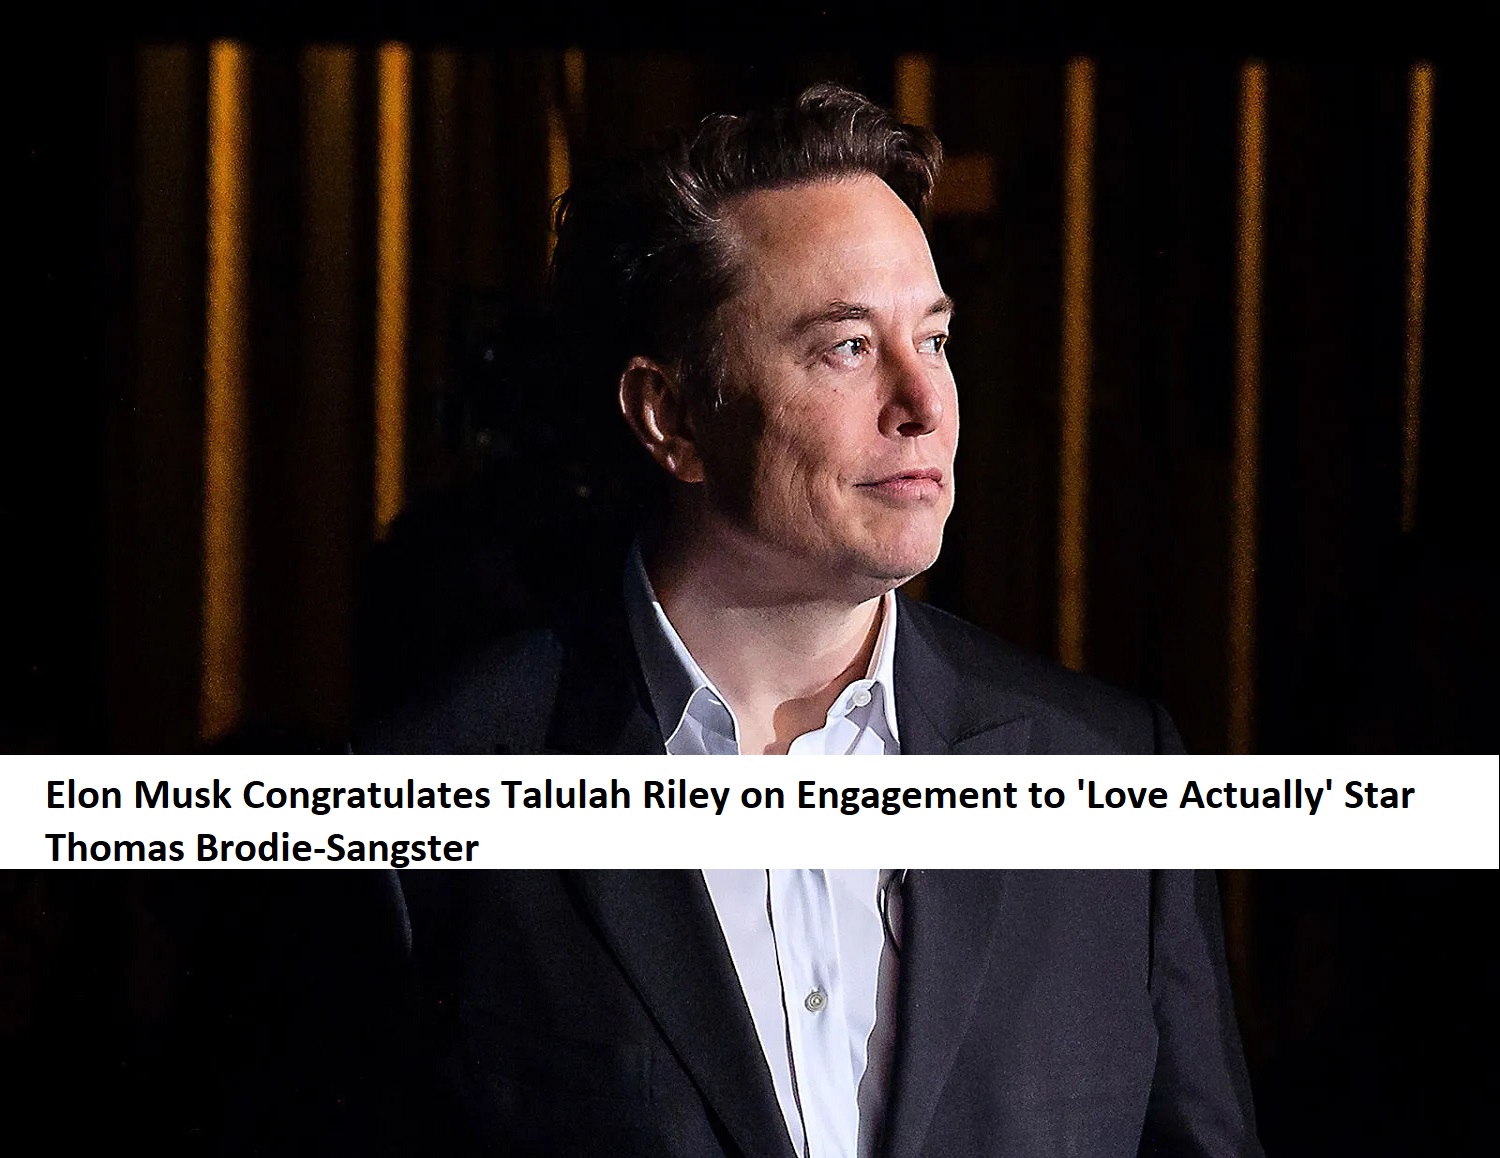 Elon Musk Congratulates Talulah Riley on Engagement to 'Love Actually' Star Thomas Brodie-Sangster